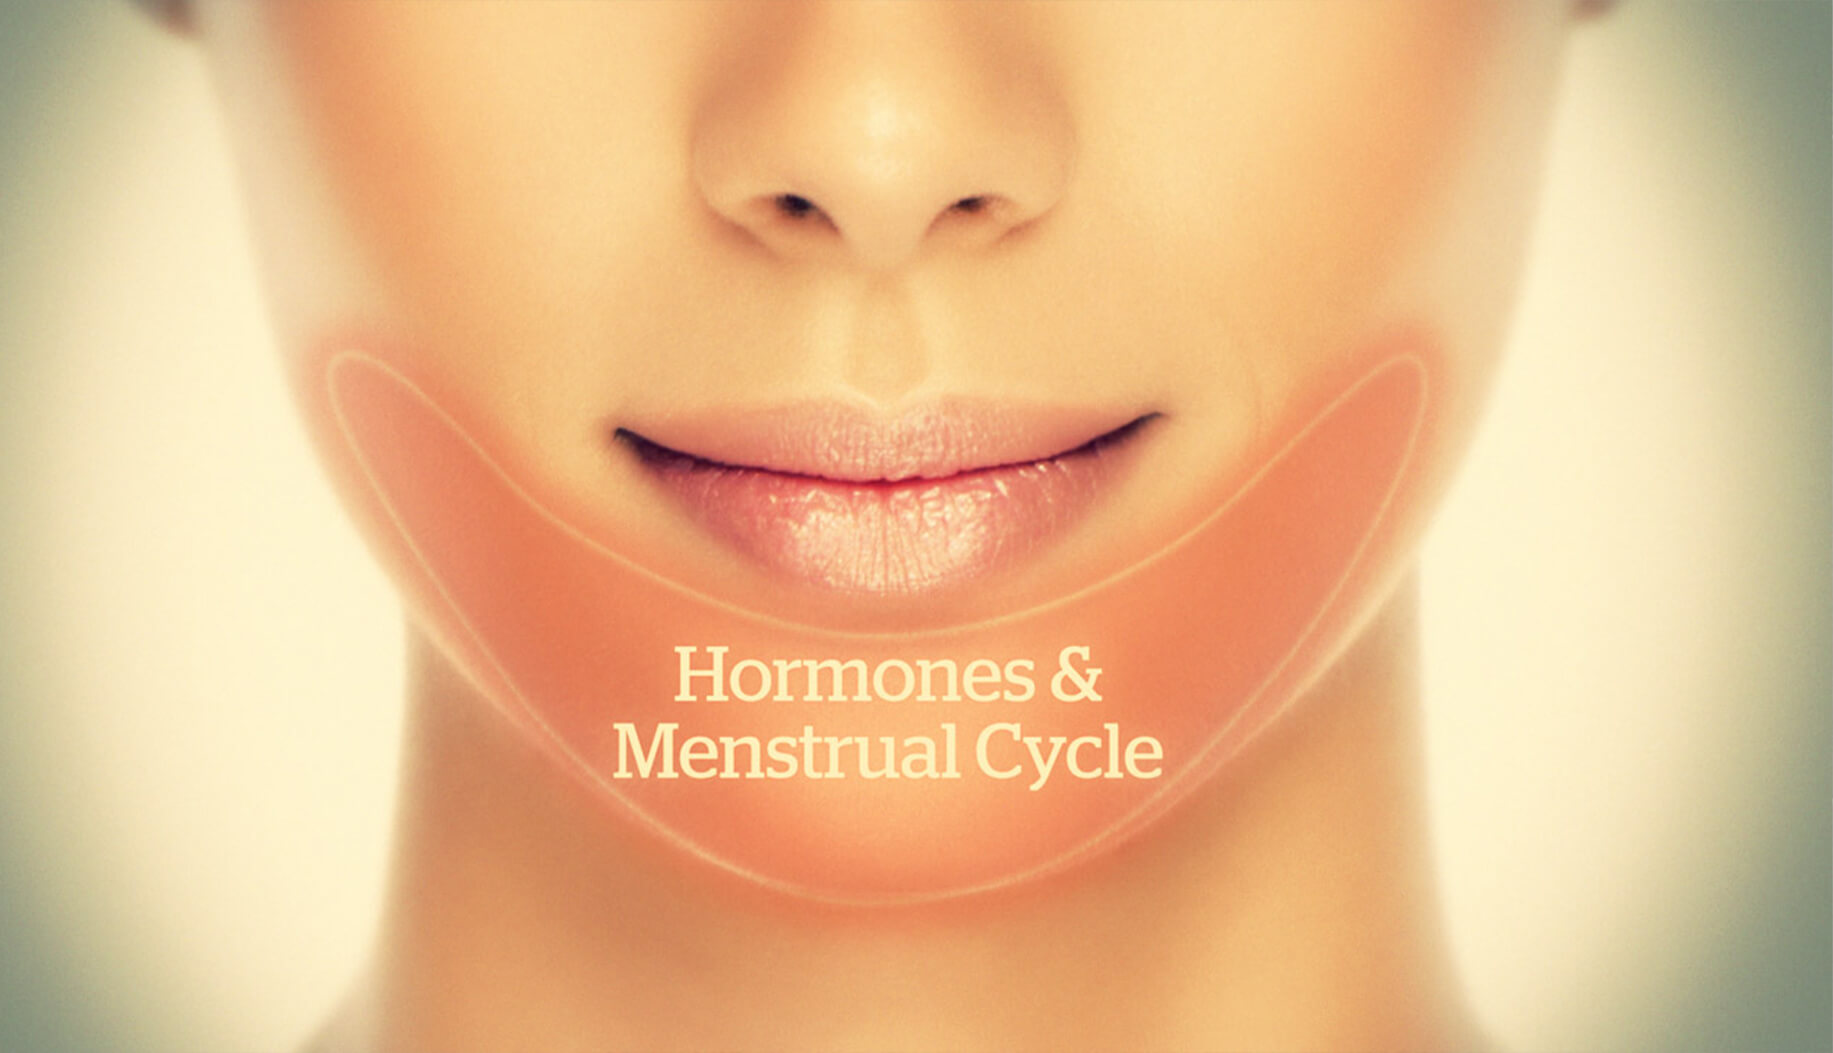 Do Pimples Near the Menstrual Cycle Indicate a Hormonal Imbalance?